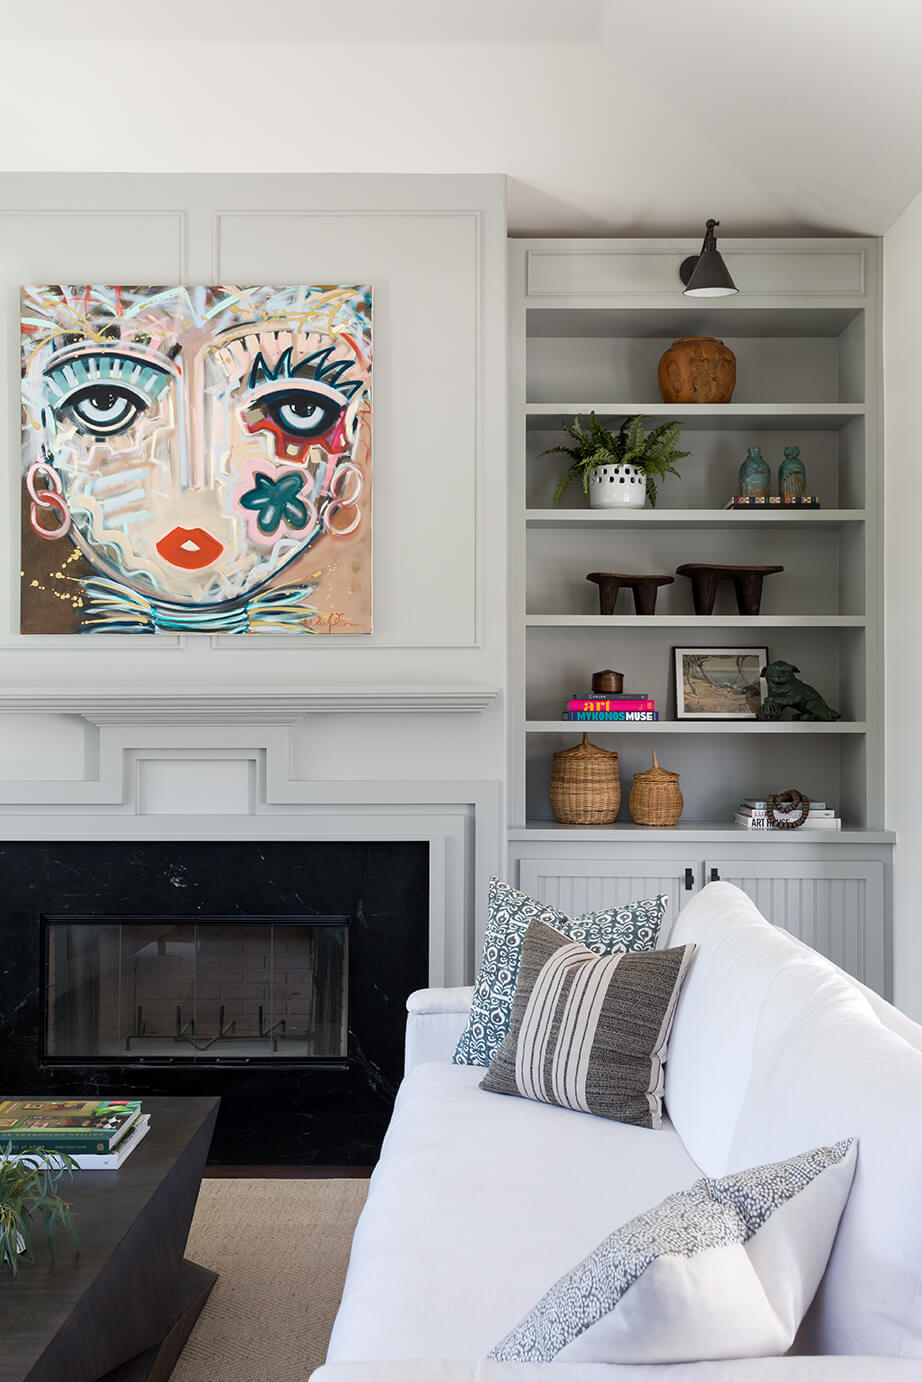 Fireplace with bold painting over it